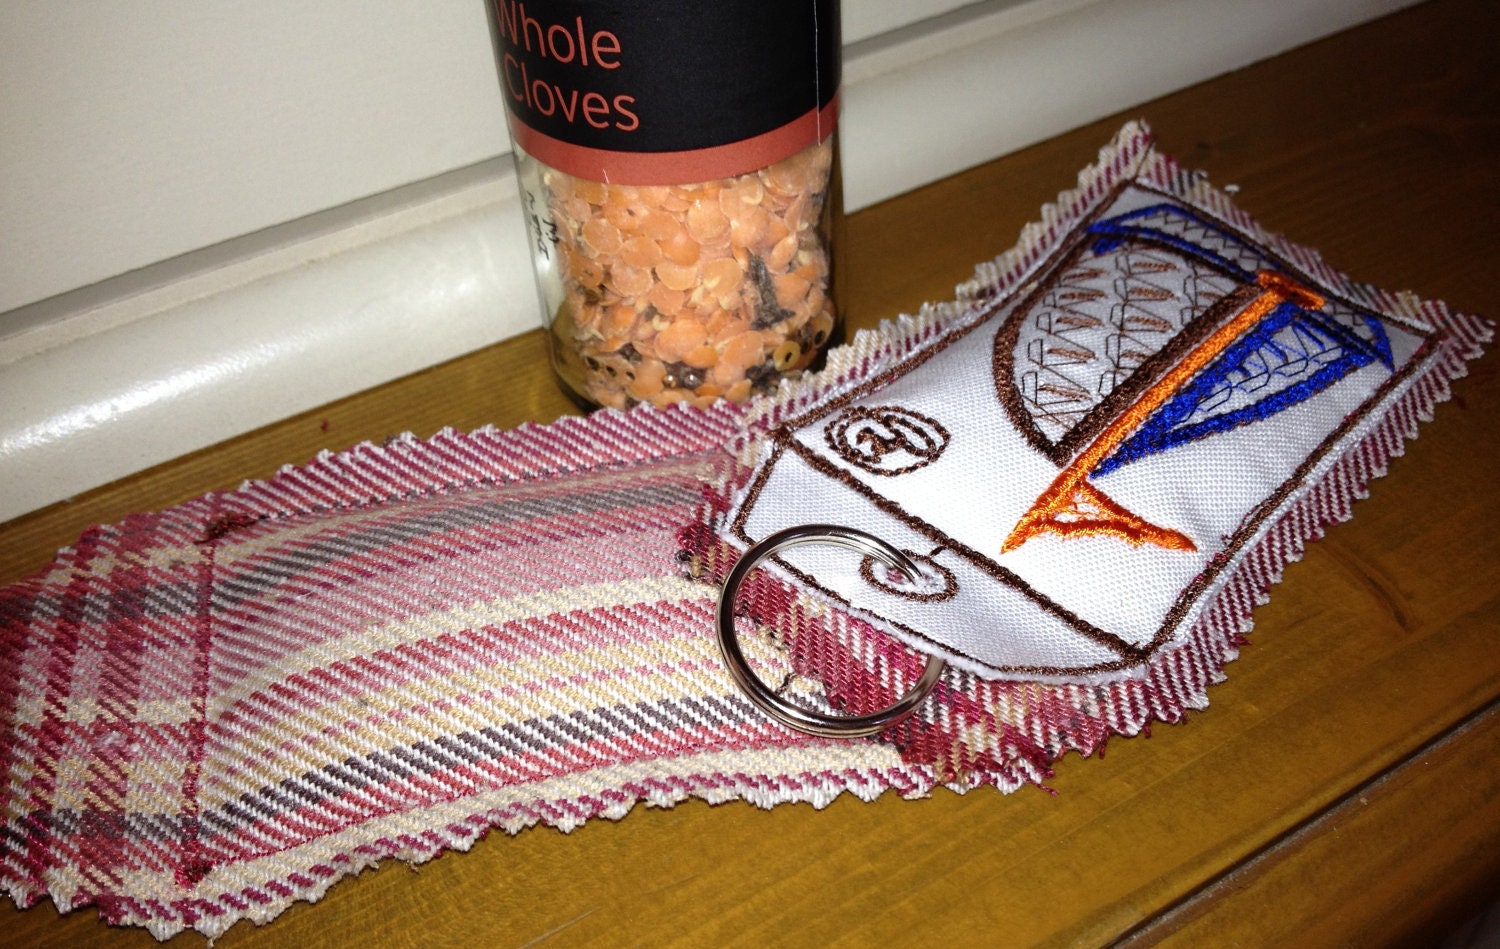 key Ring - Organic Lentil & Whole Clove Fragrance - Embroidery Sailing Boat